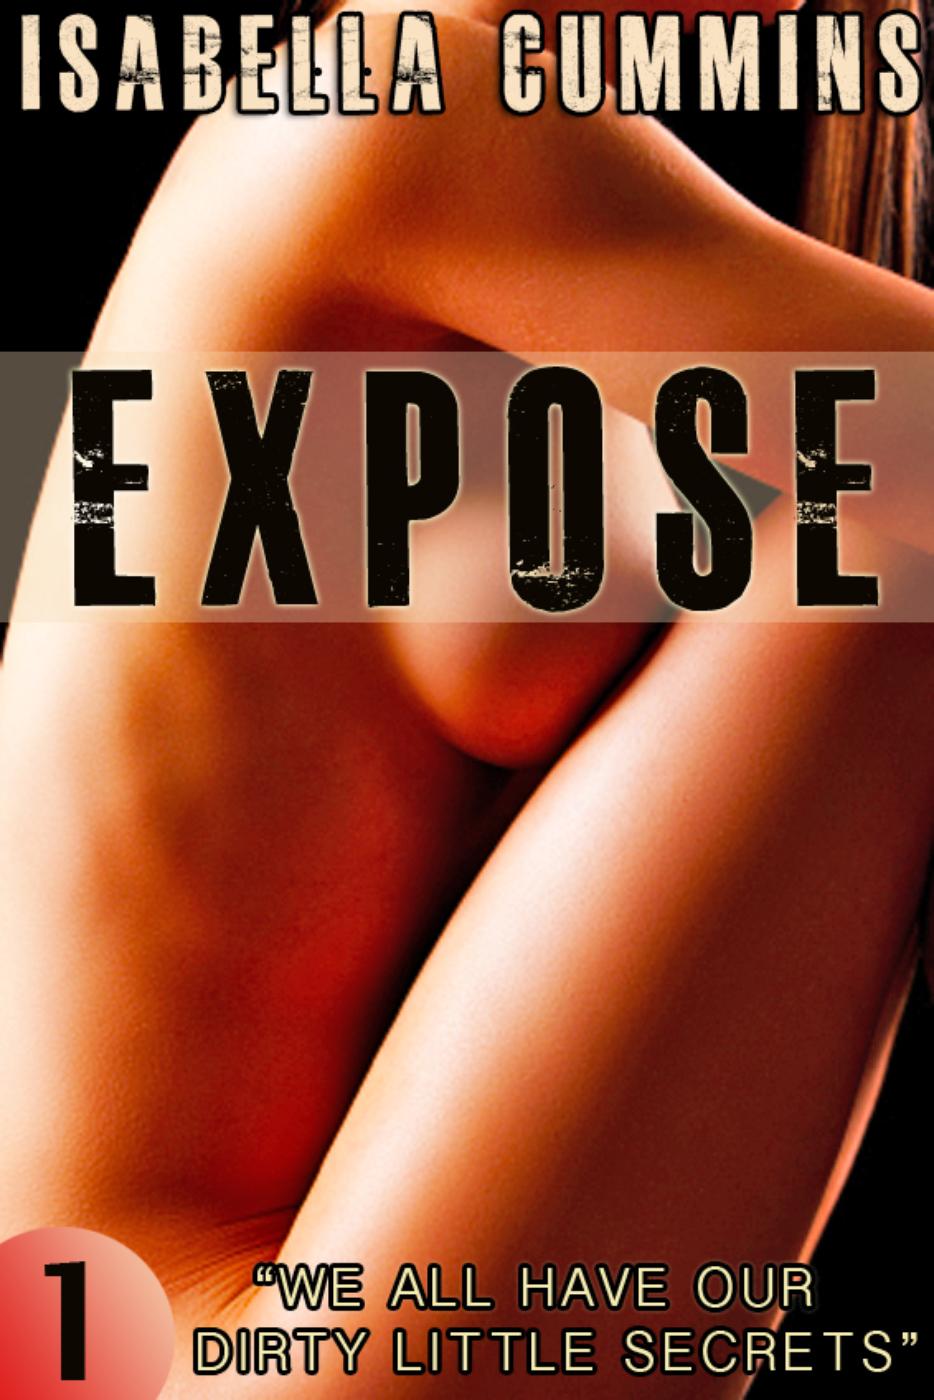 Erotic Books Pdf - READ FREE Expose - Episode 1 (Adult Erotic Romance and Sex) online book in  english| All chapters | No download